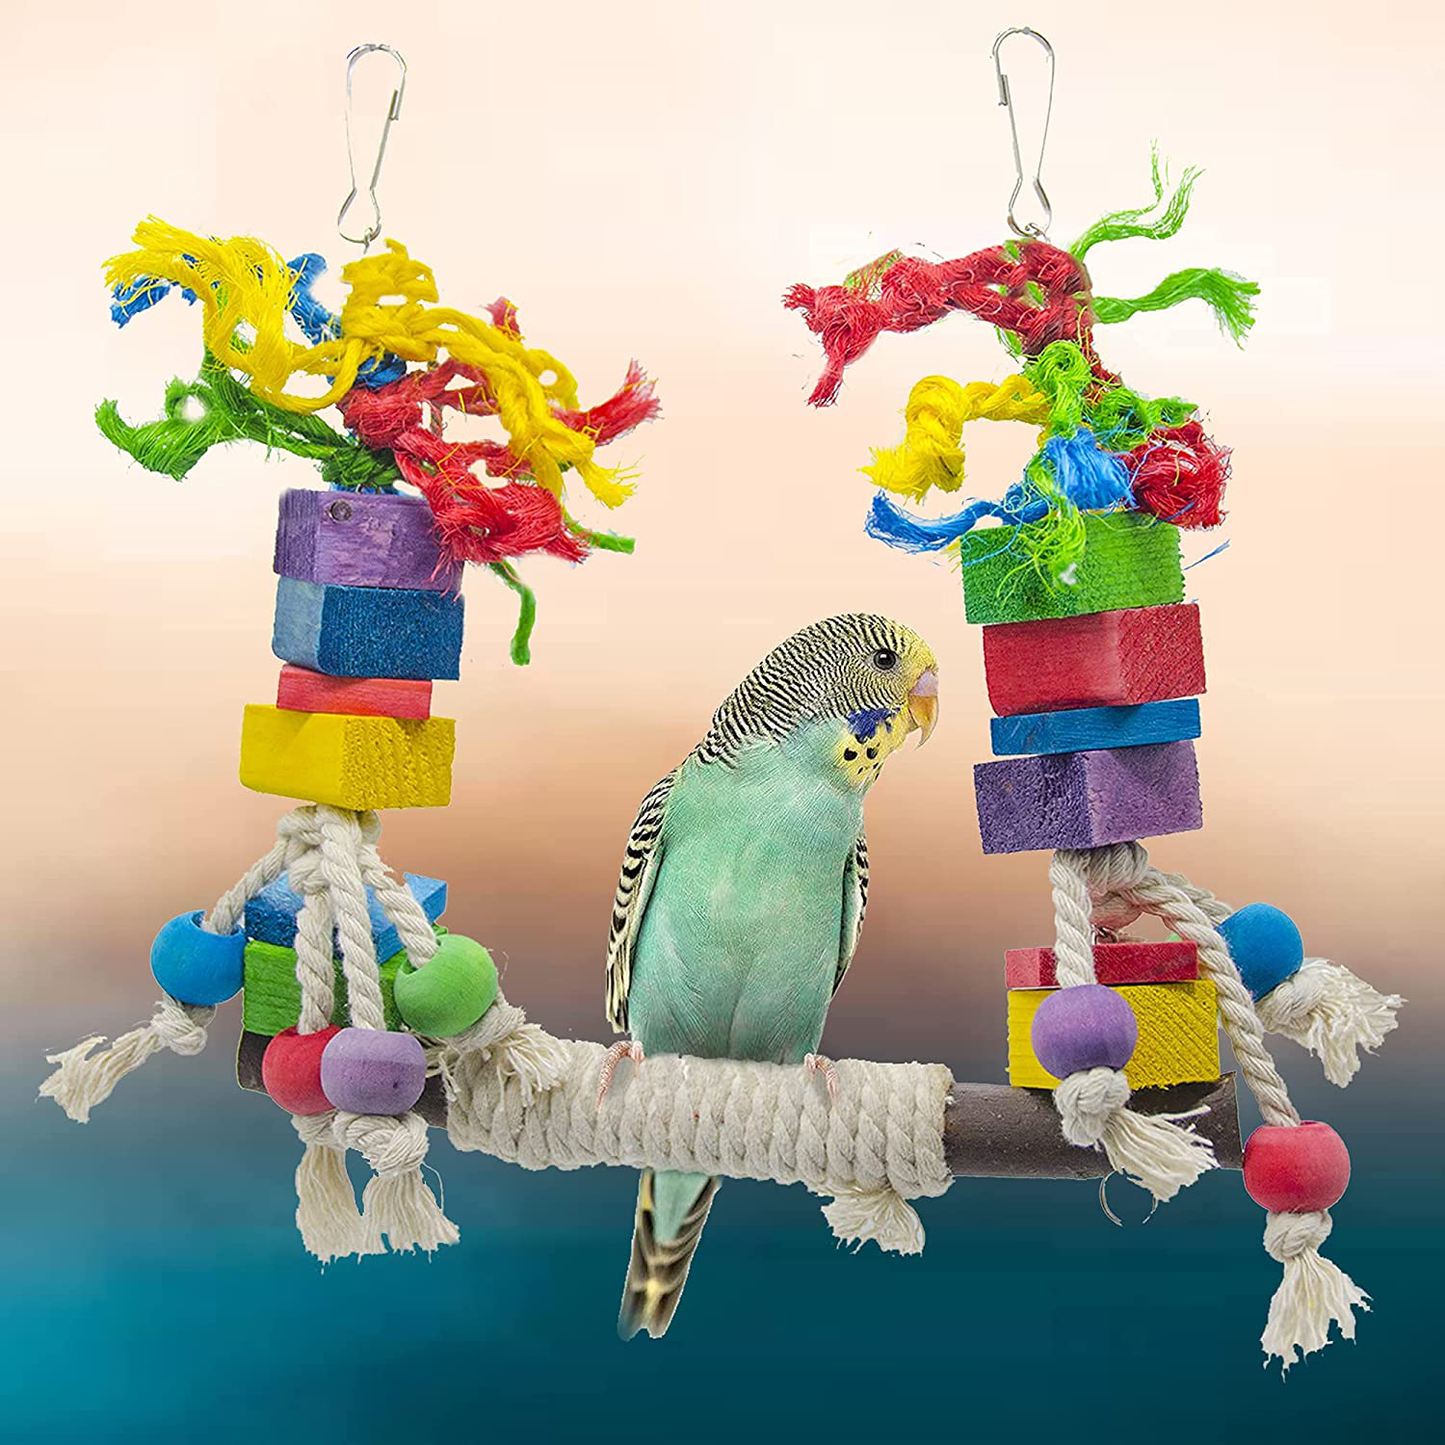 BIKOM 2PCS Bird Swing Toys Parrot Cage Bite Toys Wooden Block Bird Cage Hammock Swing Toy Hanging Toy for Parakeets Cockatiels or Medium Parrots and Birds like Amazon,African Grey and Cockatoos.